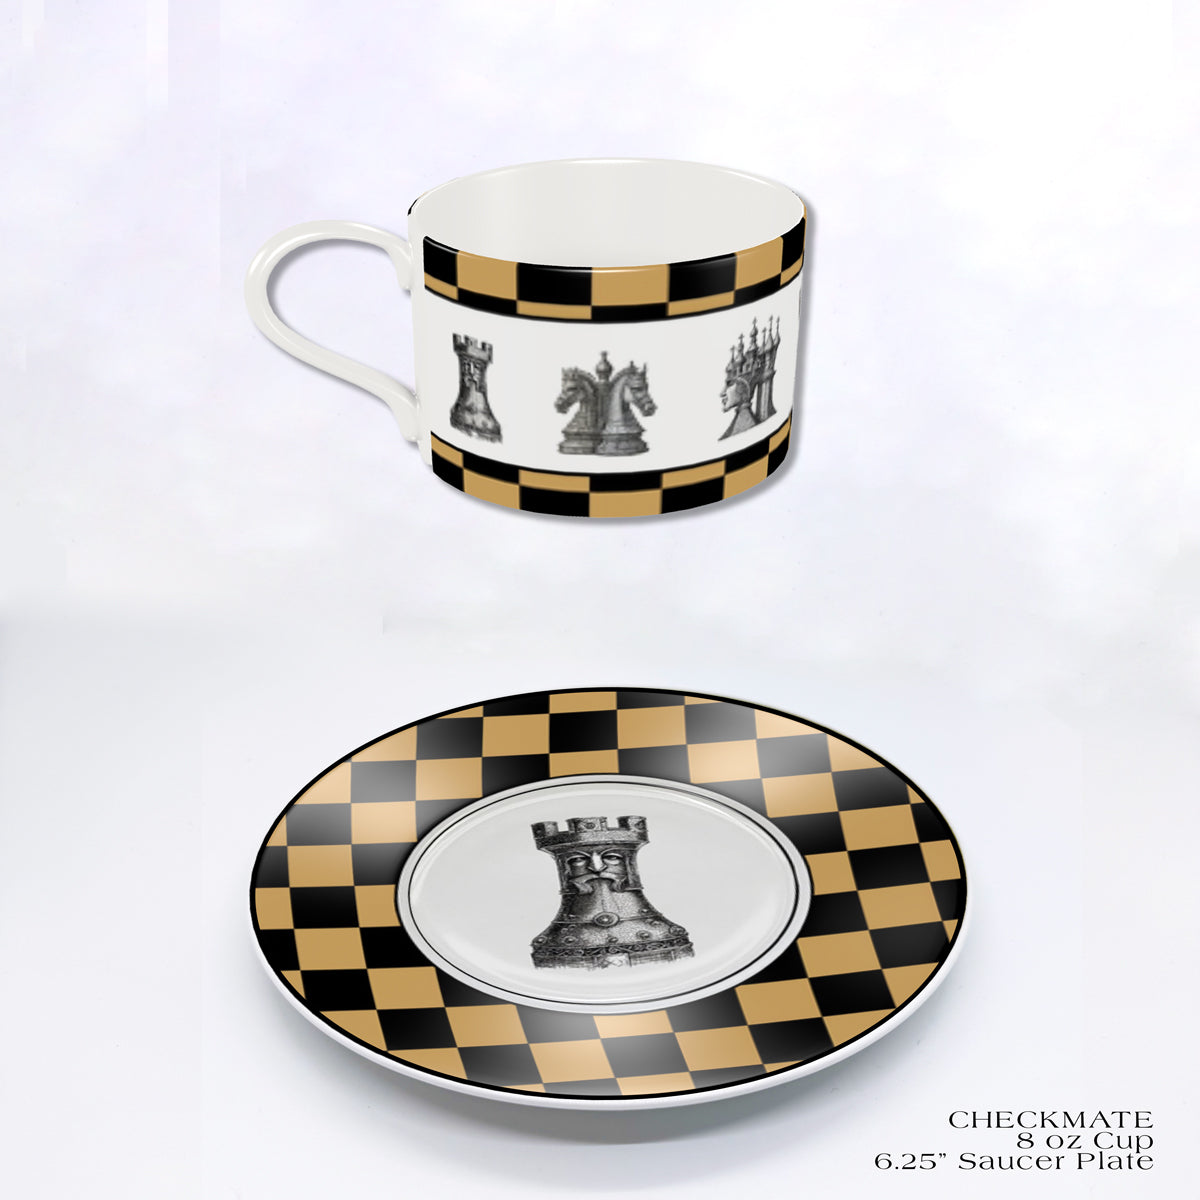 CHECKMATE Cup and Saucer